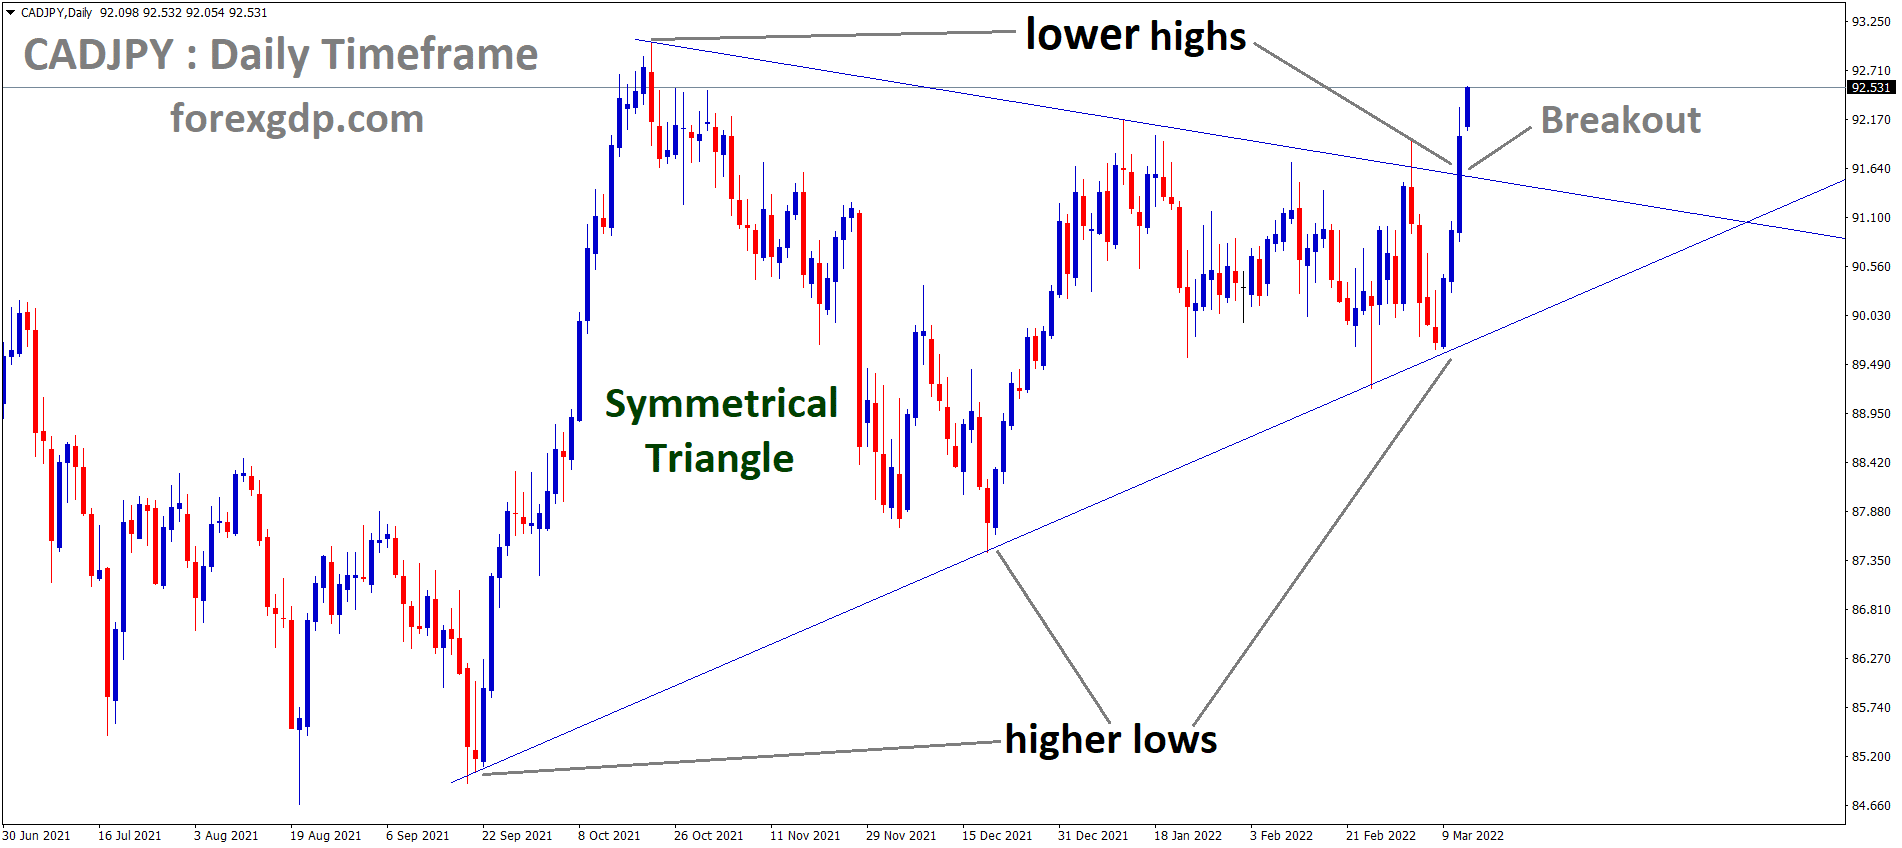 CADJPY is moving in the Symmetrical triangle pattern and the market has reached the Top area of the pattern 1 1